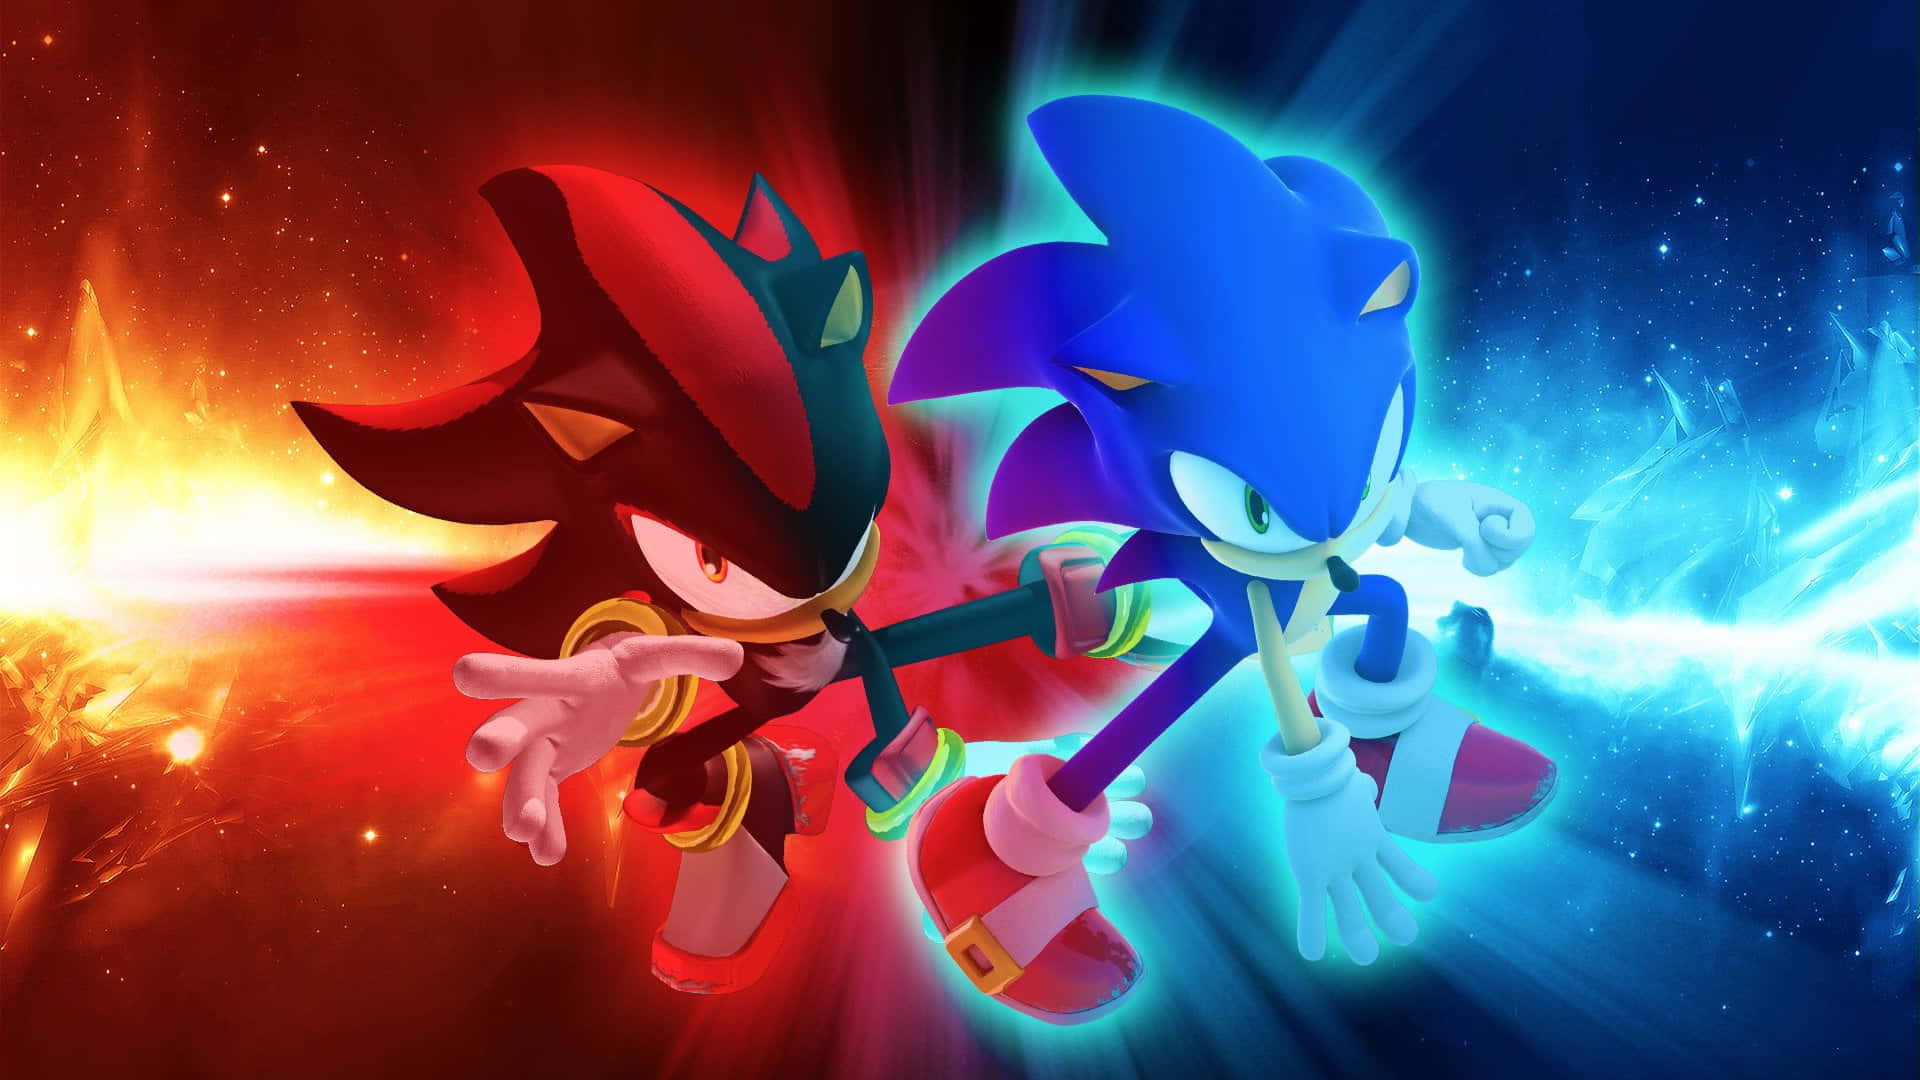 Sonic Adventure HD - Sonic and Tails Racing Through the City Wallpaper